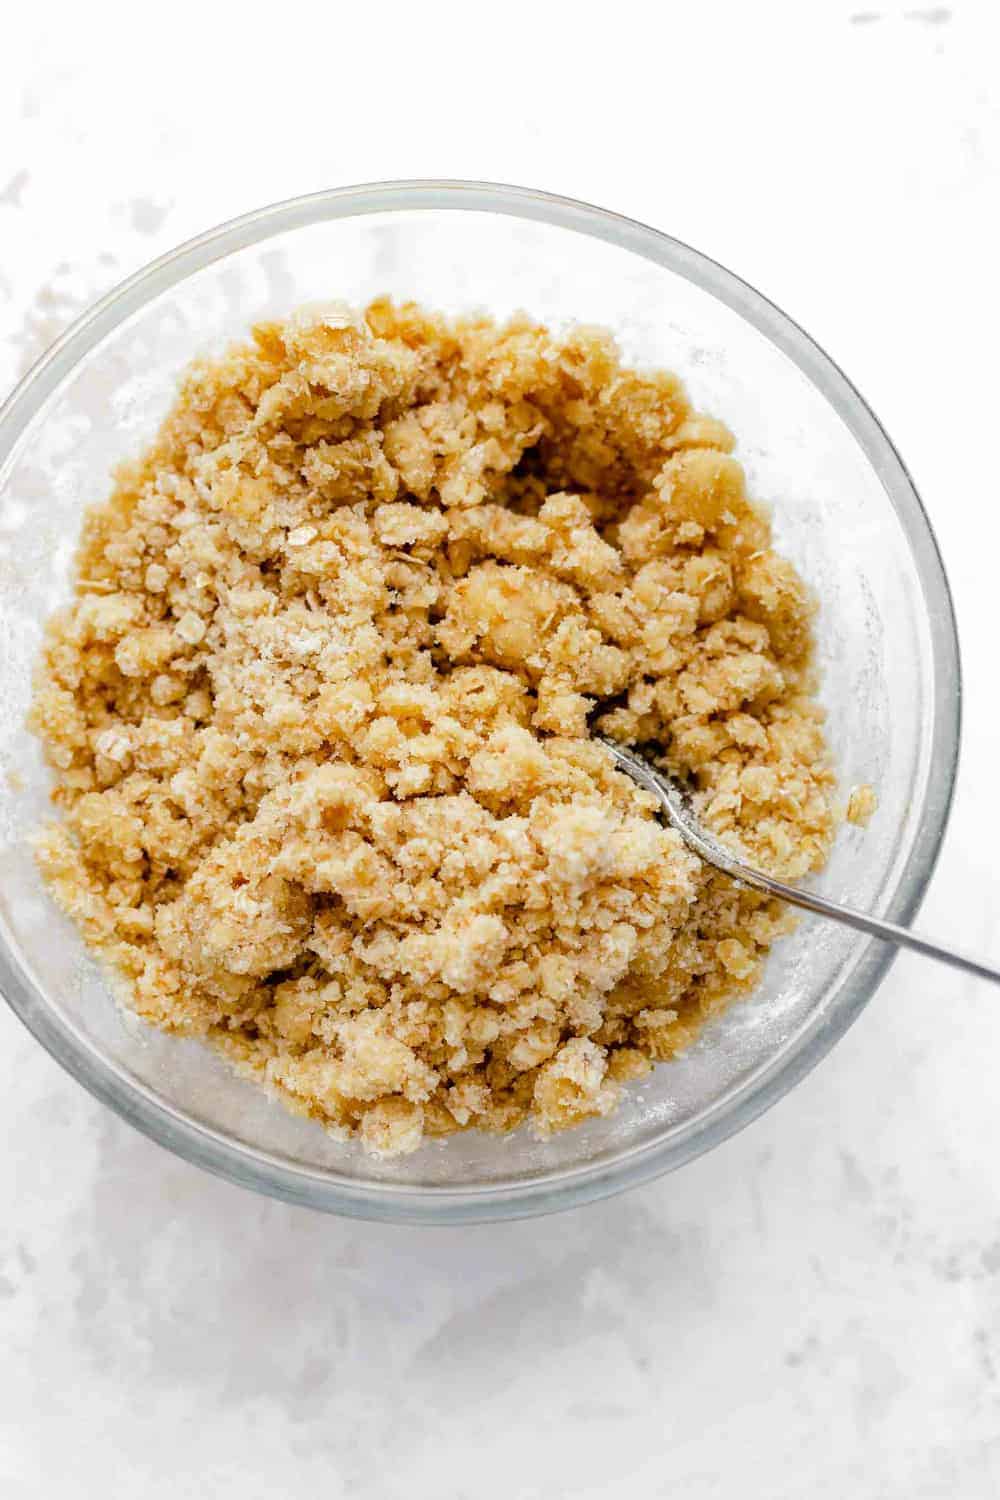 Crumble topping for apple crisp in a glass mixing bowl